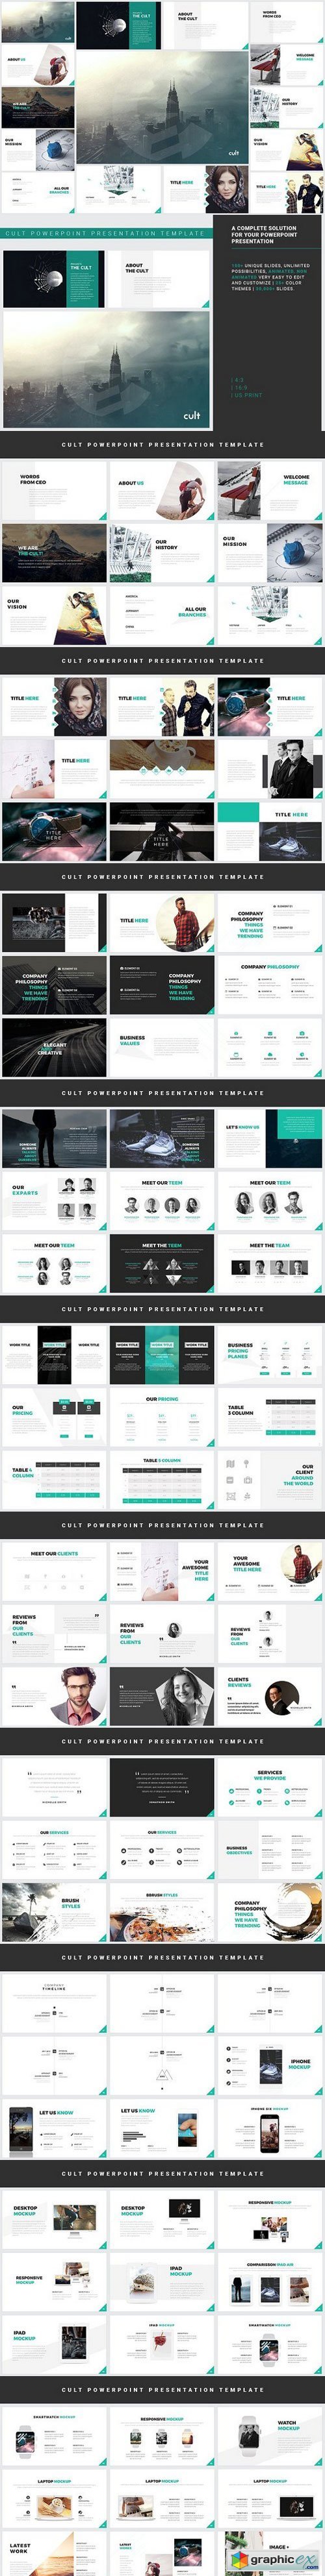 Powerpoint Template - Cult